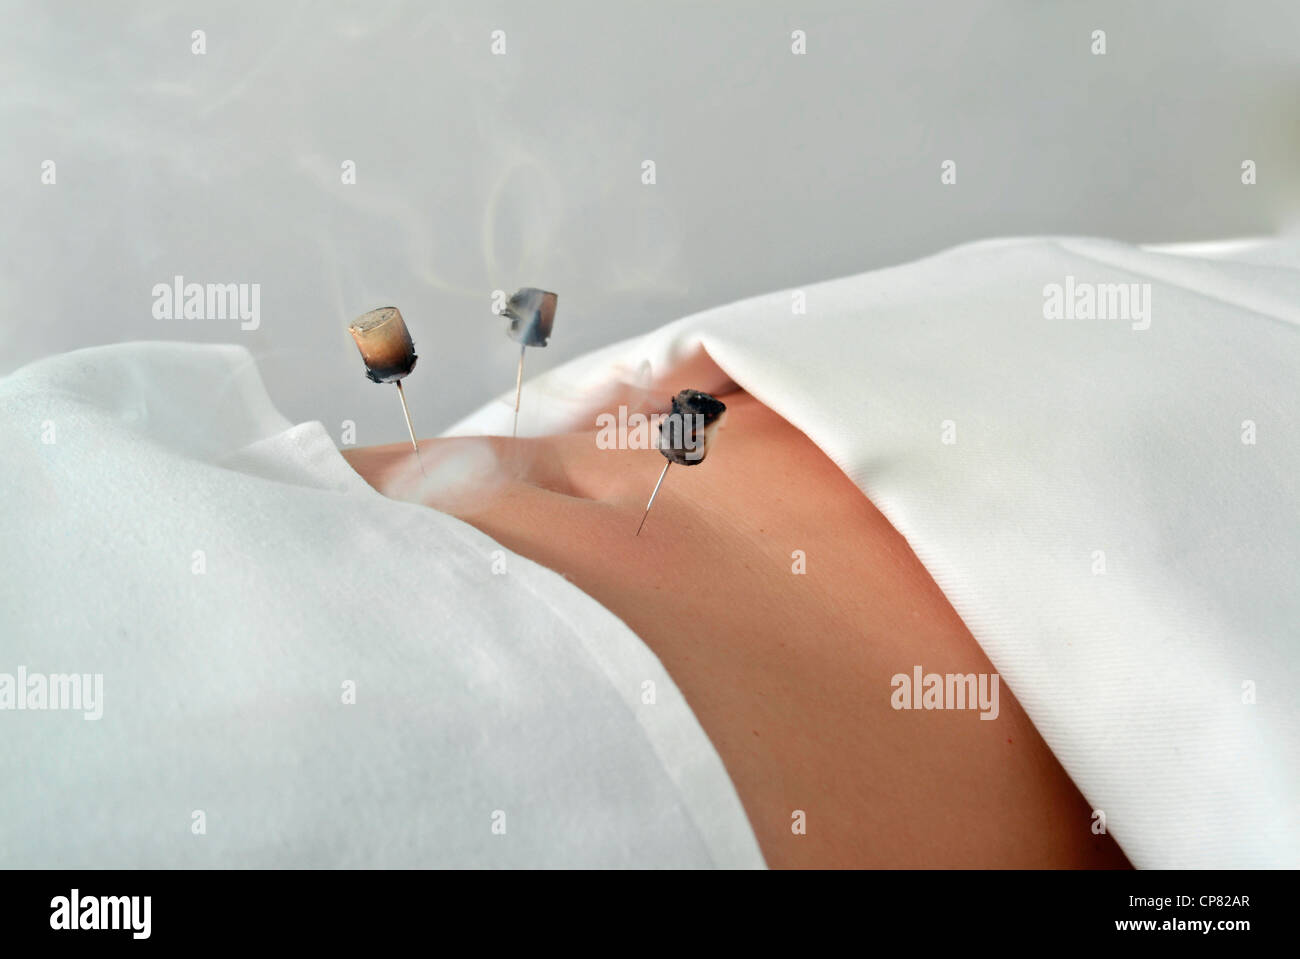 Patient during a Moxa treatment in traditional Chinese medicine. Stock Photo